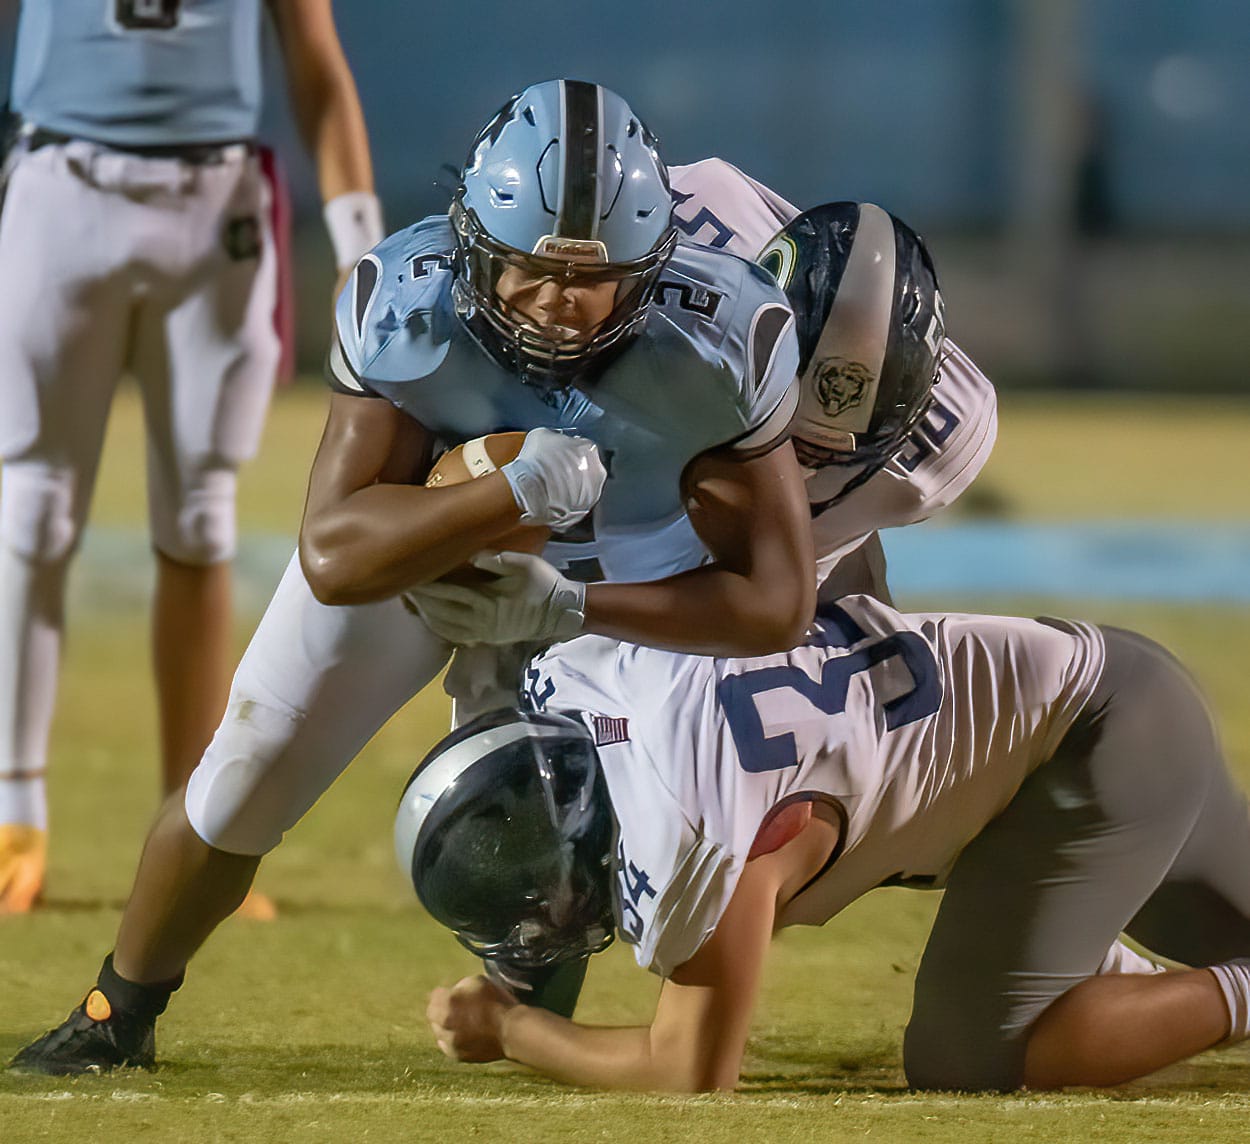 NCT running back,2, Christian Cromer powers for some tough yardage against Central High at Nature Coast. Photo by JOE DiCRISTOFALO